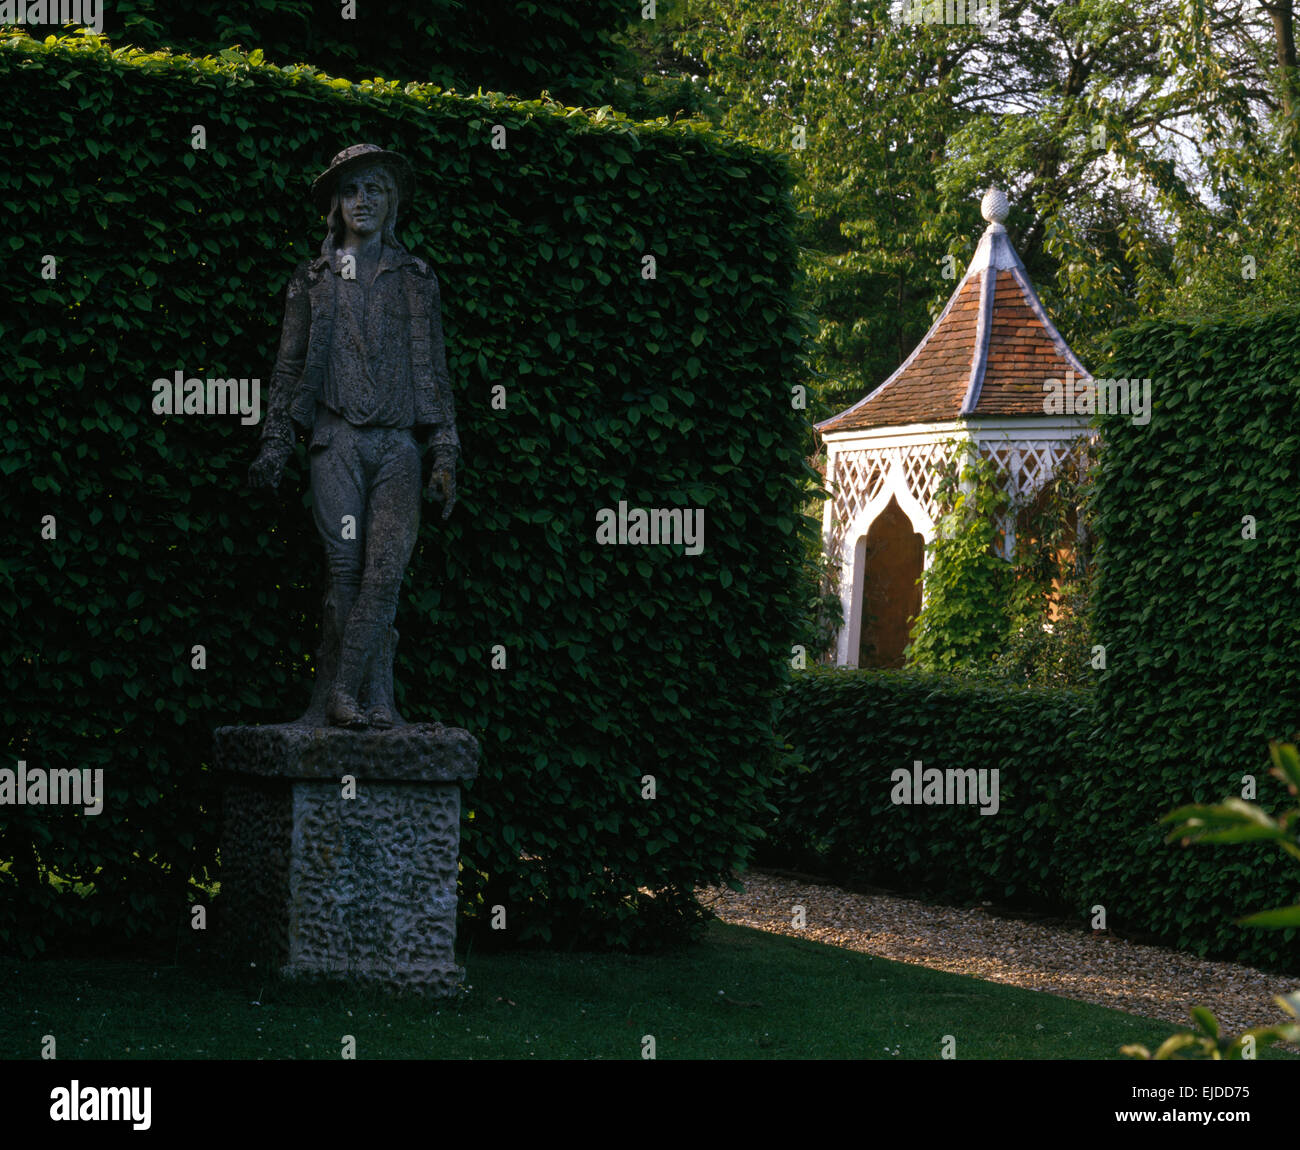 Stone statue on plinth against clipped beech hedge in large country garden with tiled roof arbor Stock Photo